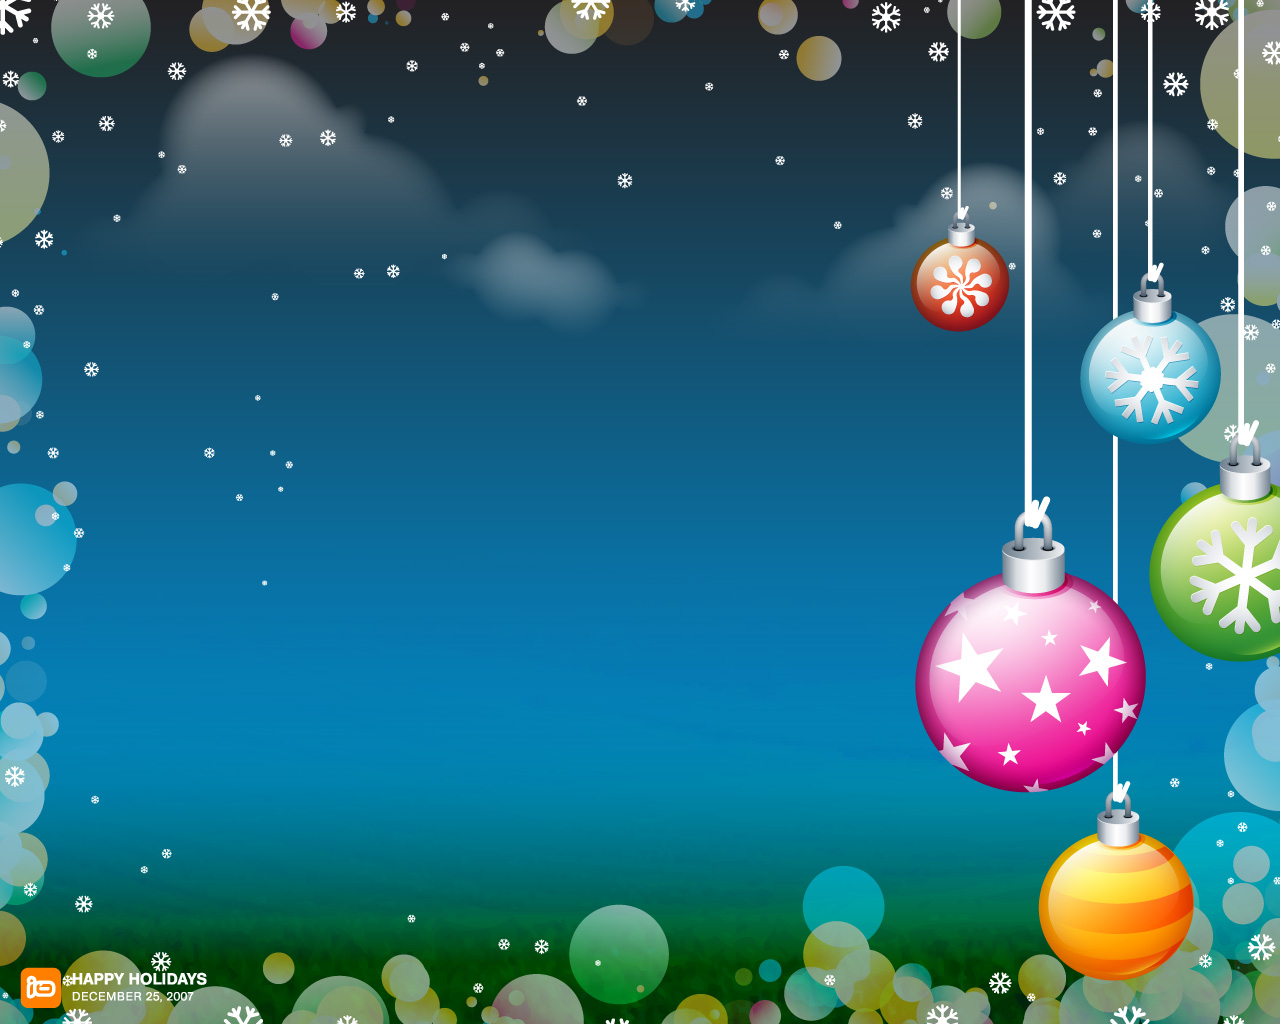 Christmas Holiday Backgrounds Wallpapers Wallpapers High Definition